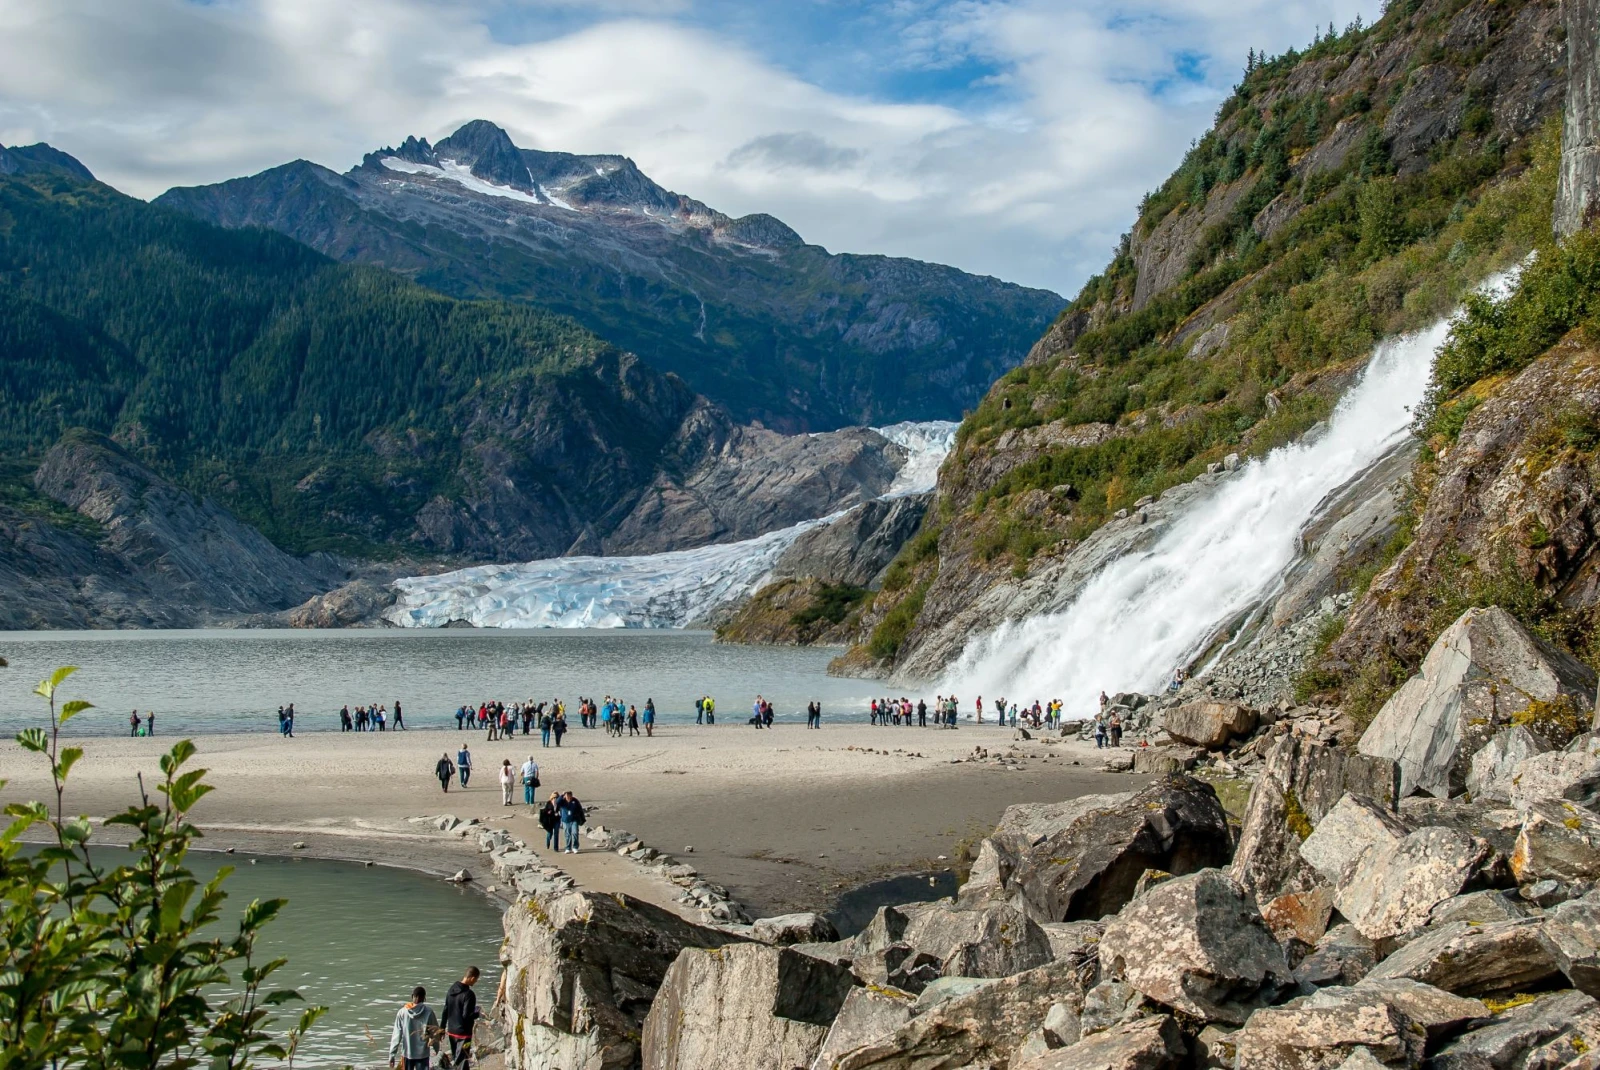 massive glacier with tourists walking at the base